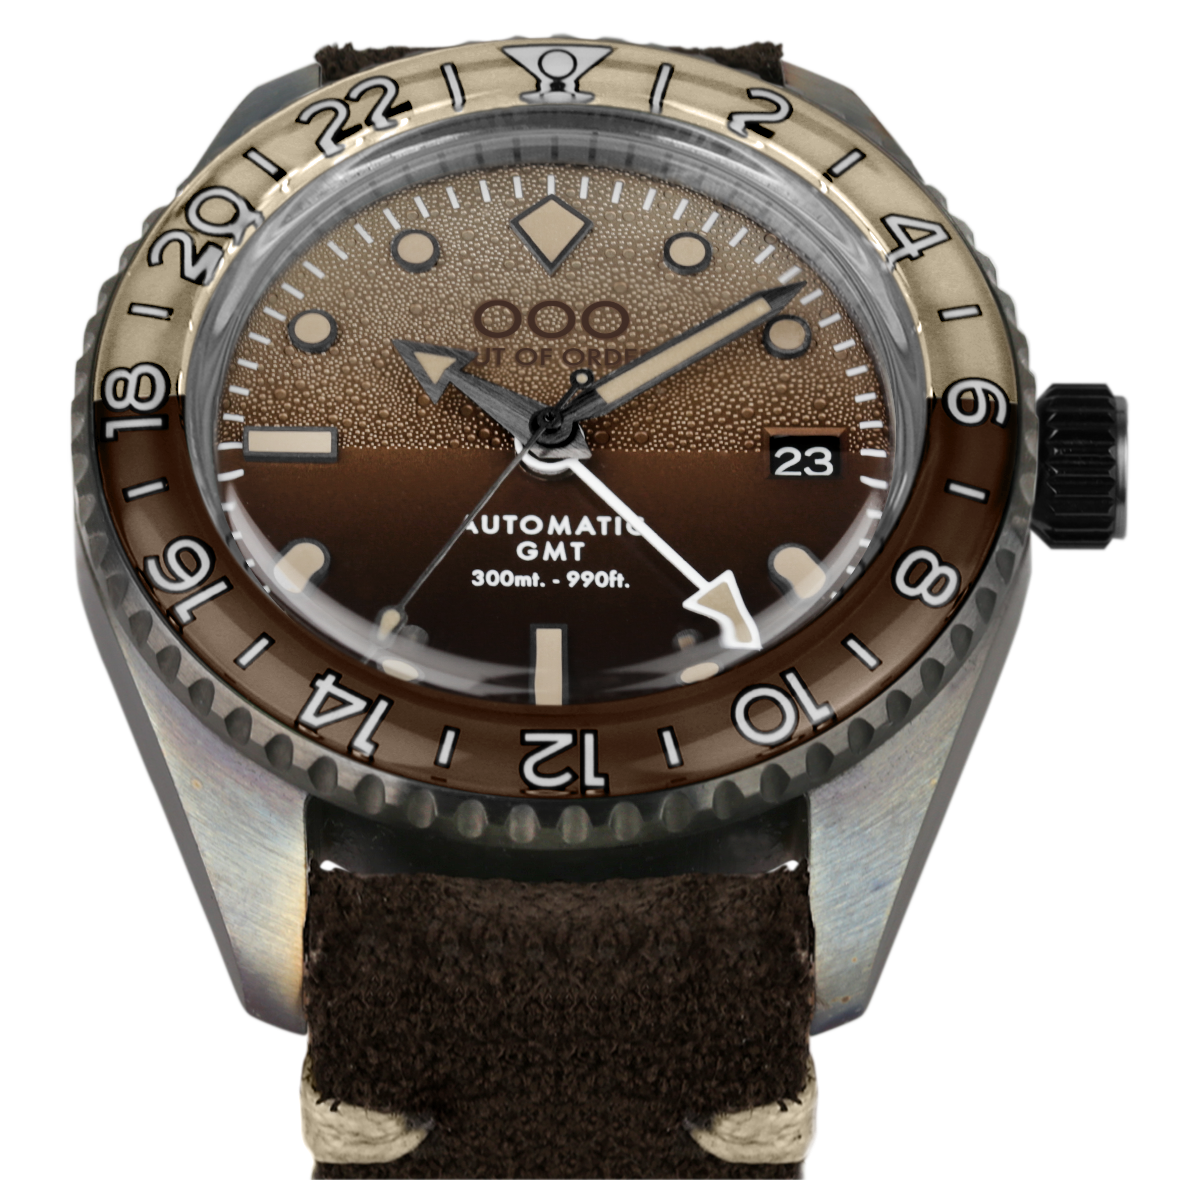 IRISH COFFEE AUTOMATIC GMT – Out of Order S.r.l